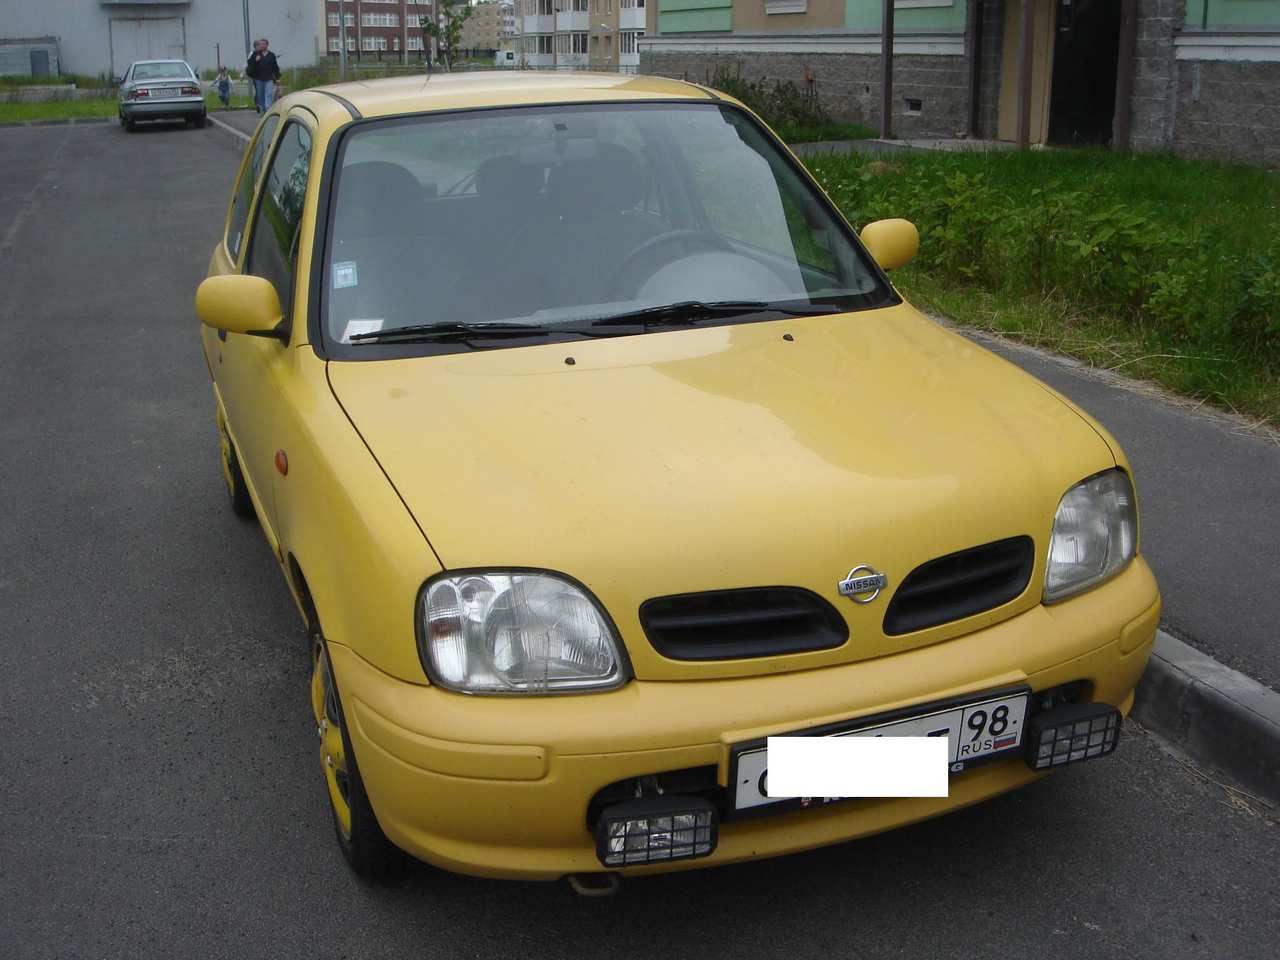 Nissan micra 2000 review #2